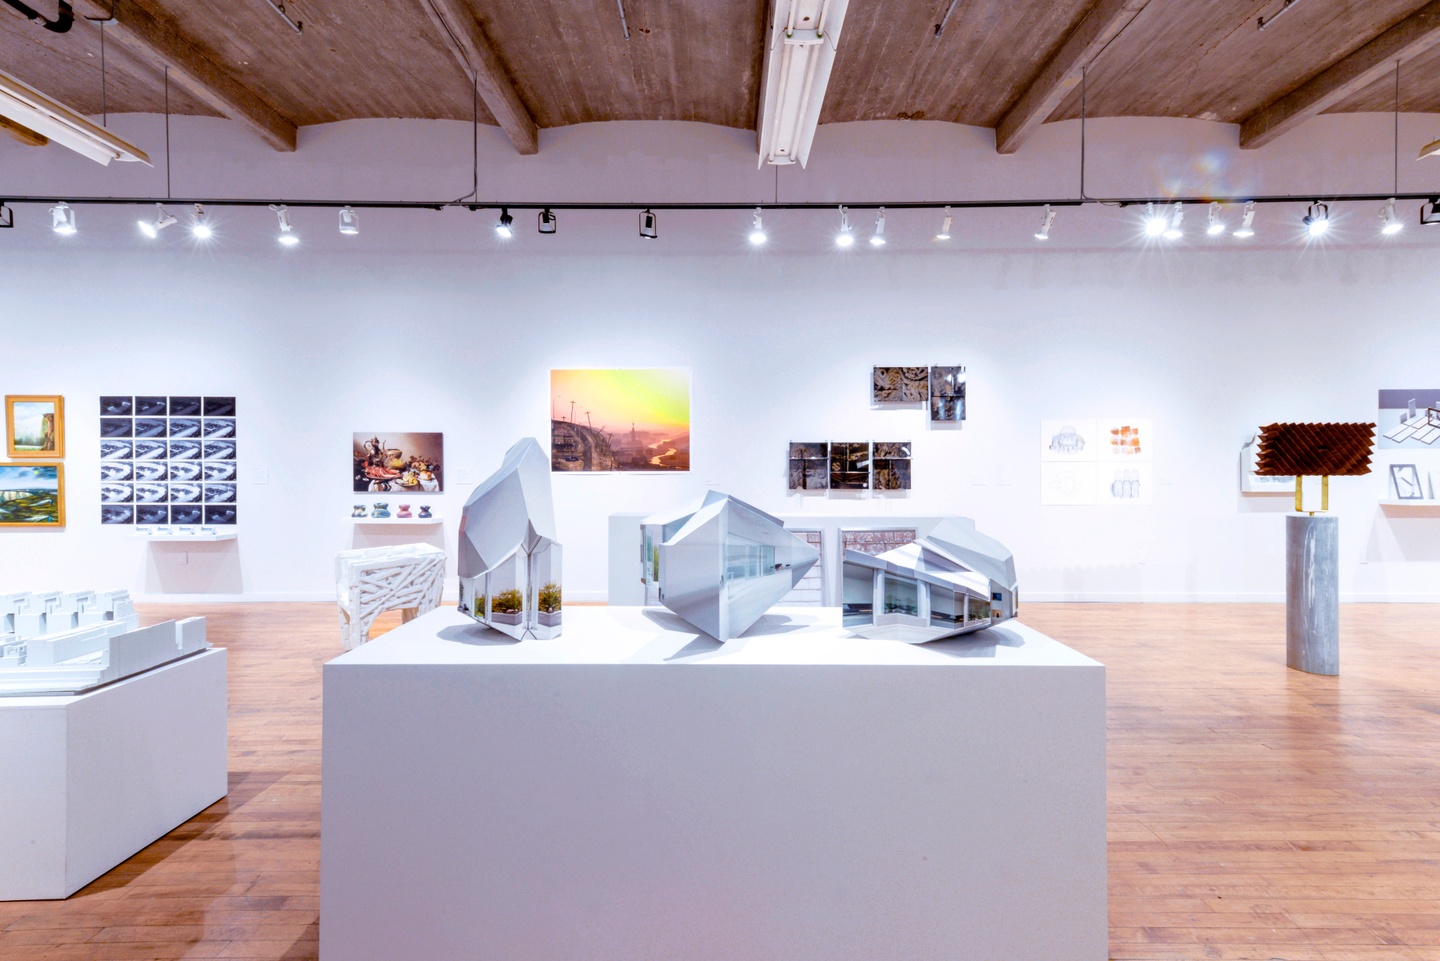 Installation photo of an architectural exhibition in a gallery space, with 3D models on white pedestals and 2D works on the walls.